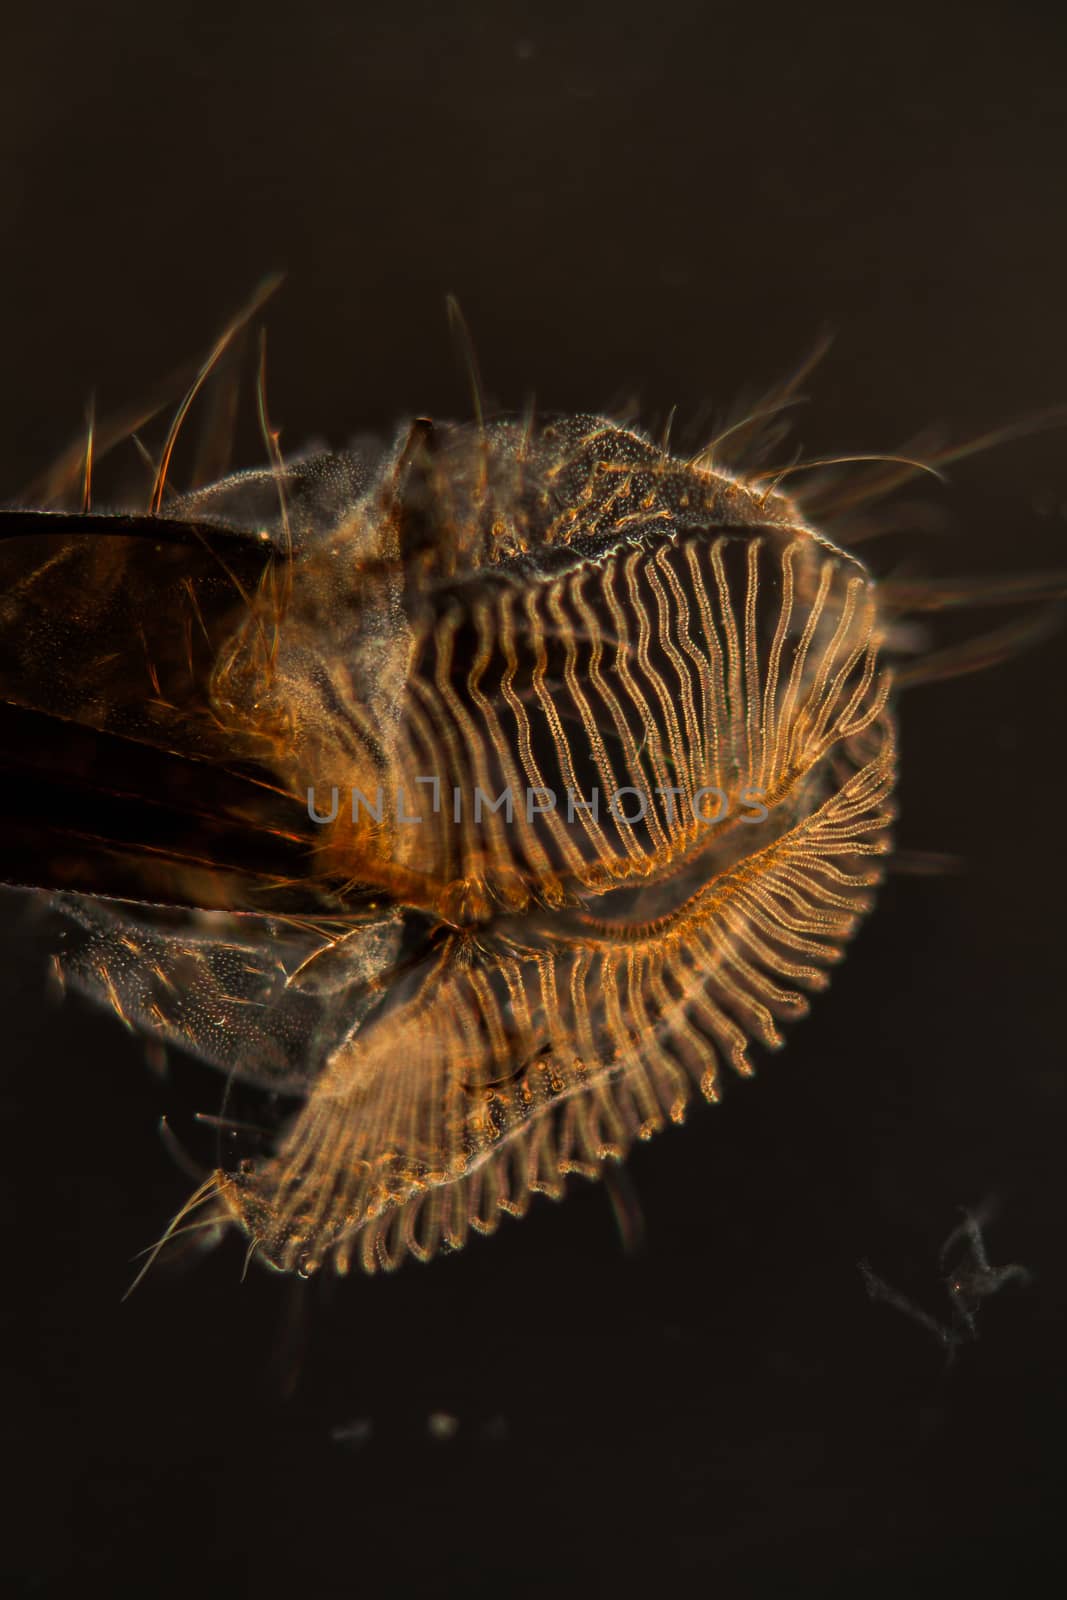 Housefly's proboscis magnified 100x by Dr-Lange